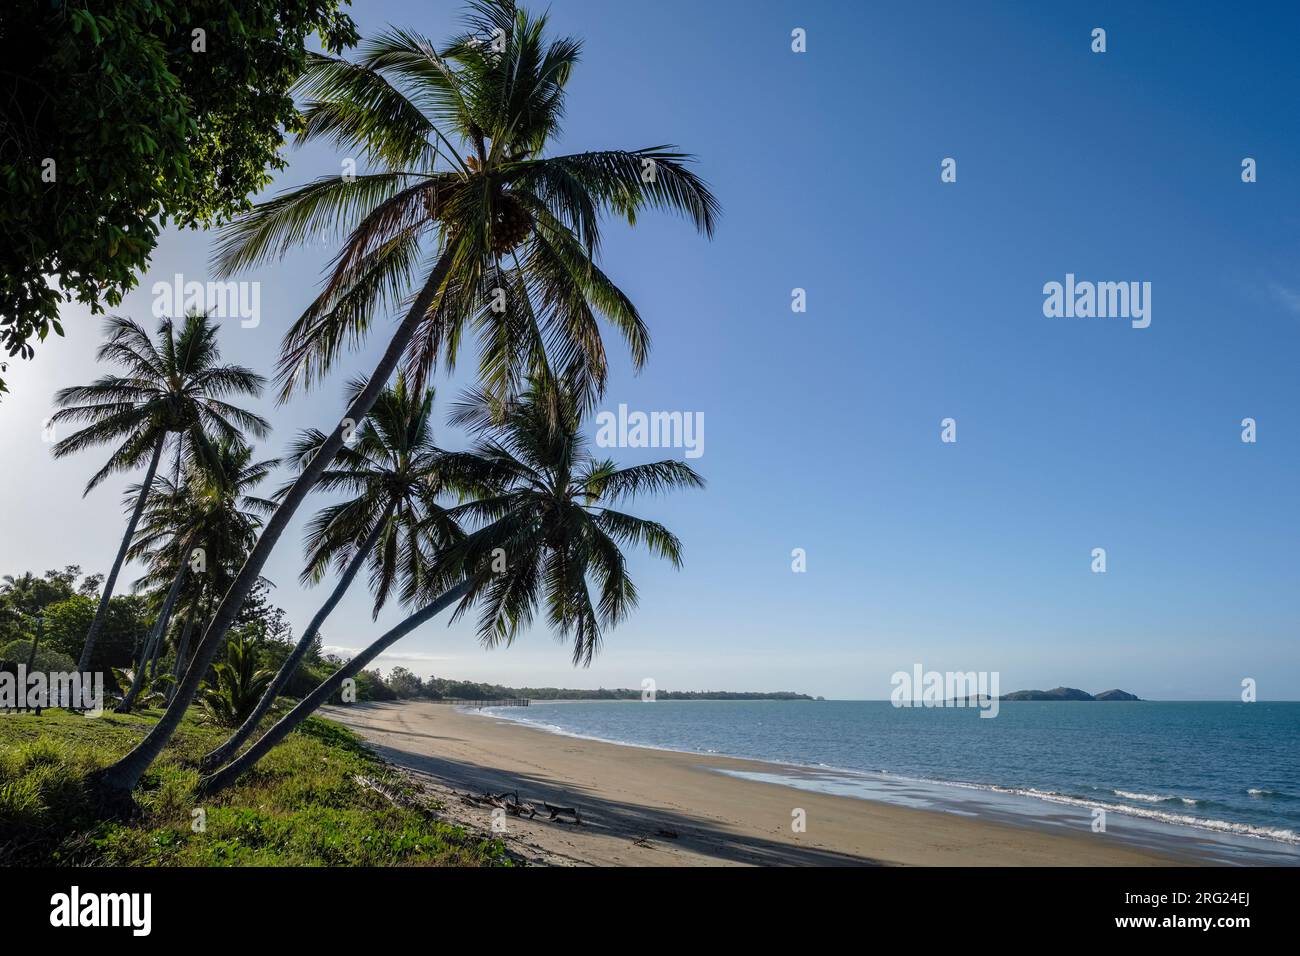 Coconut palms at Seaforth Beach on the Hibiscus Coast of Tropical North Queensland, Australia Stock Photo